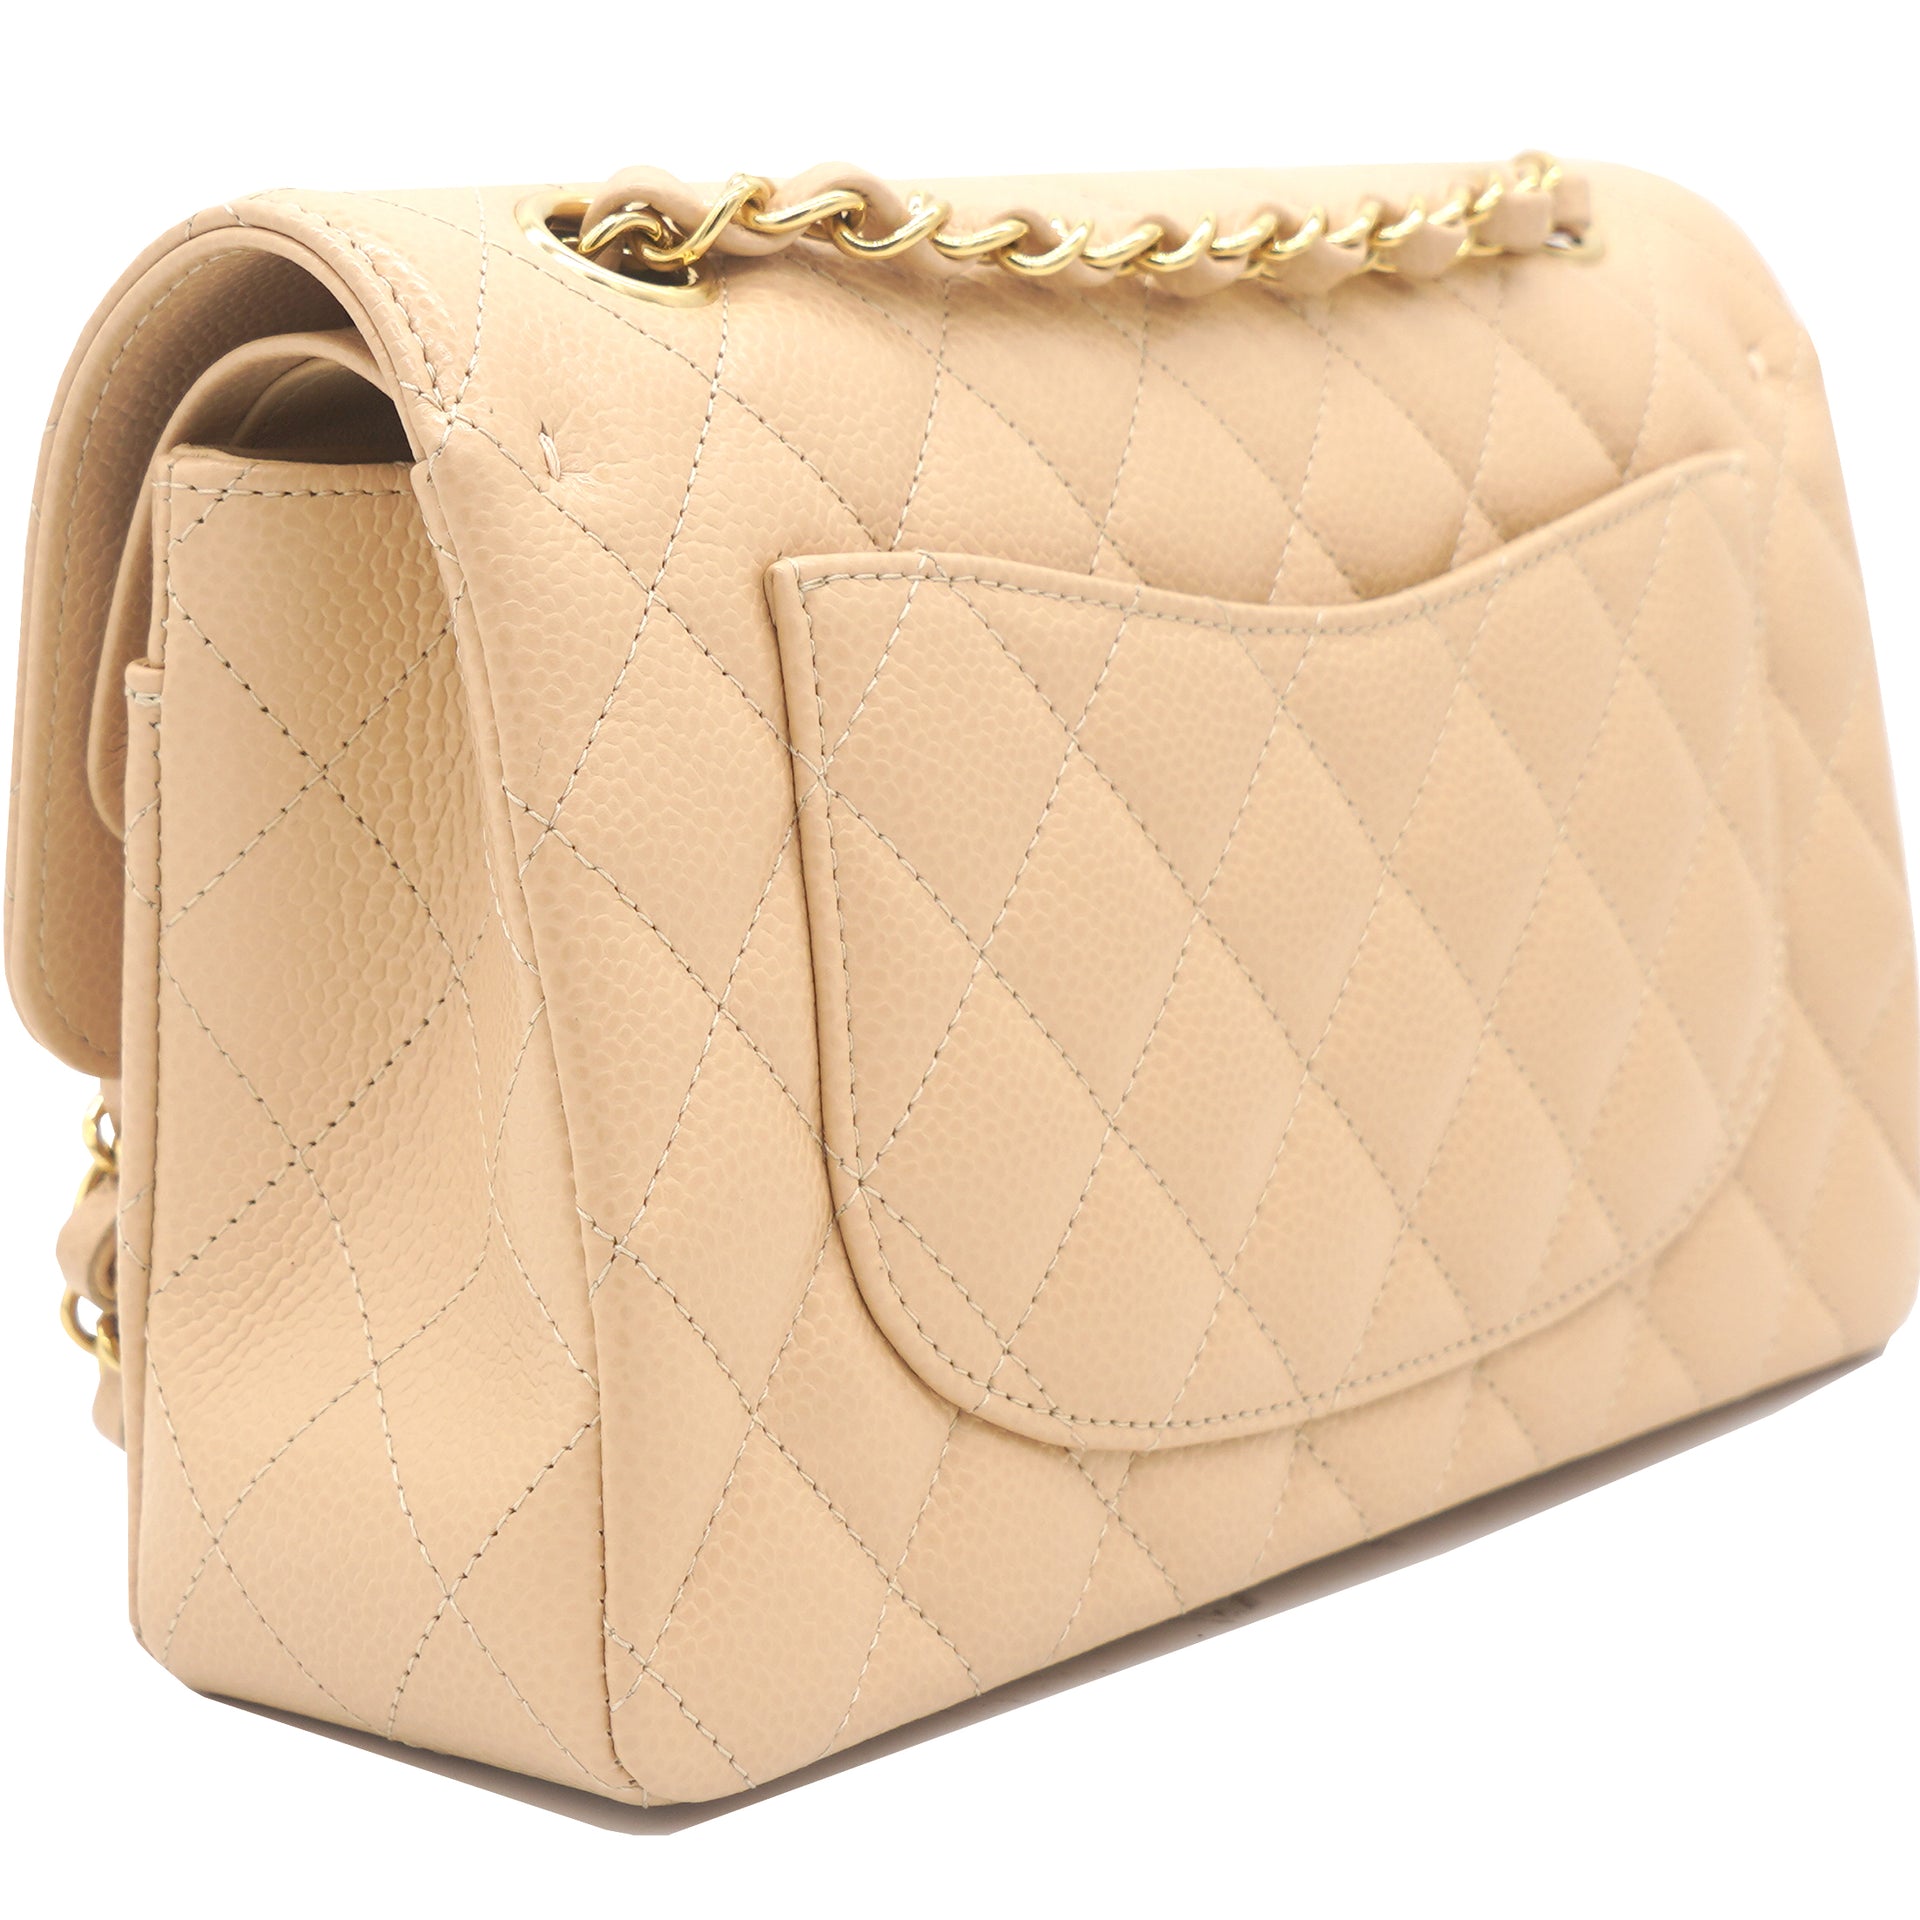 Caviar Quilted Small Classic Double Flap Beige